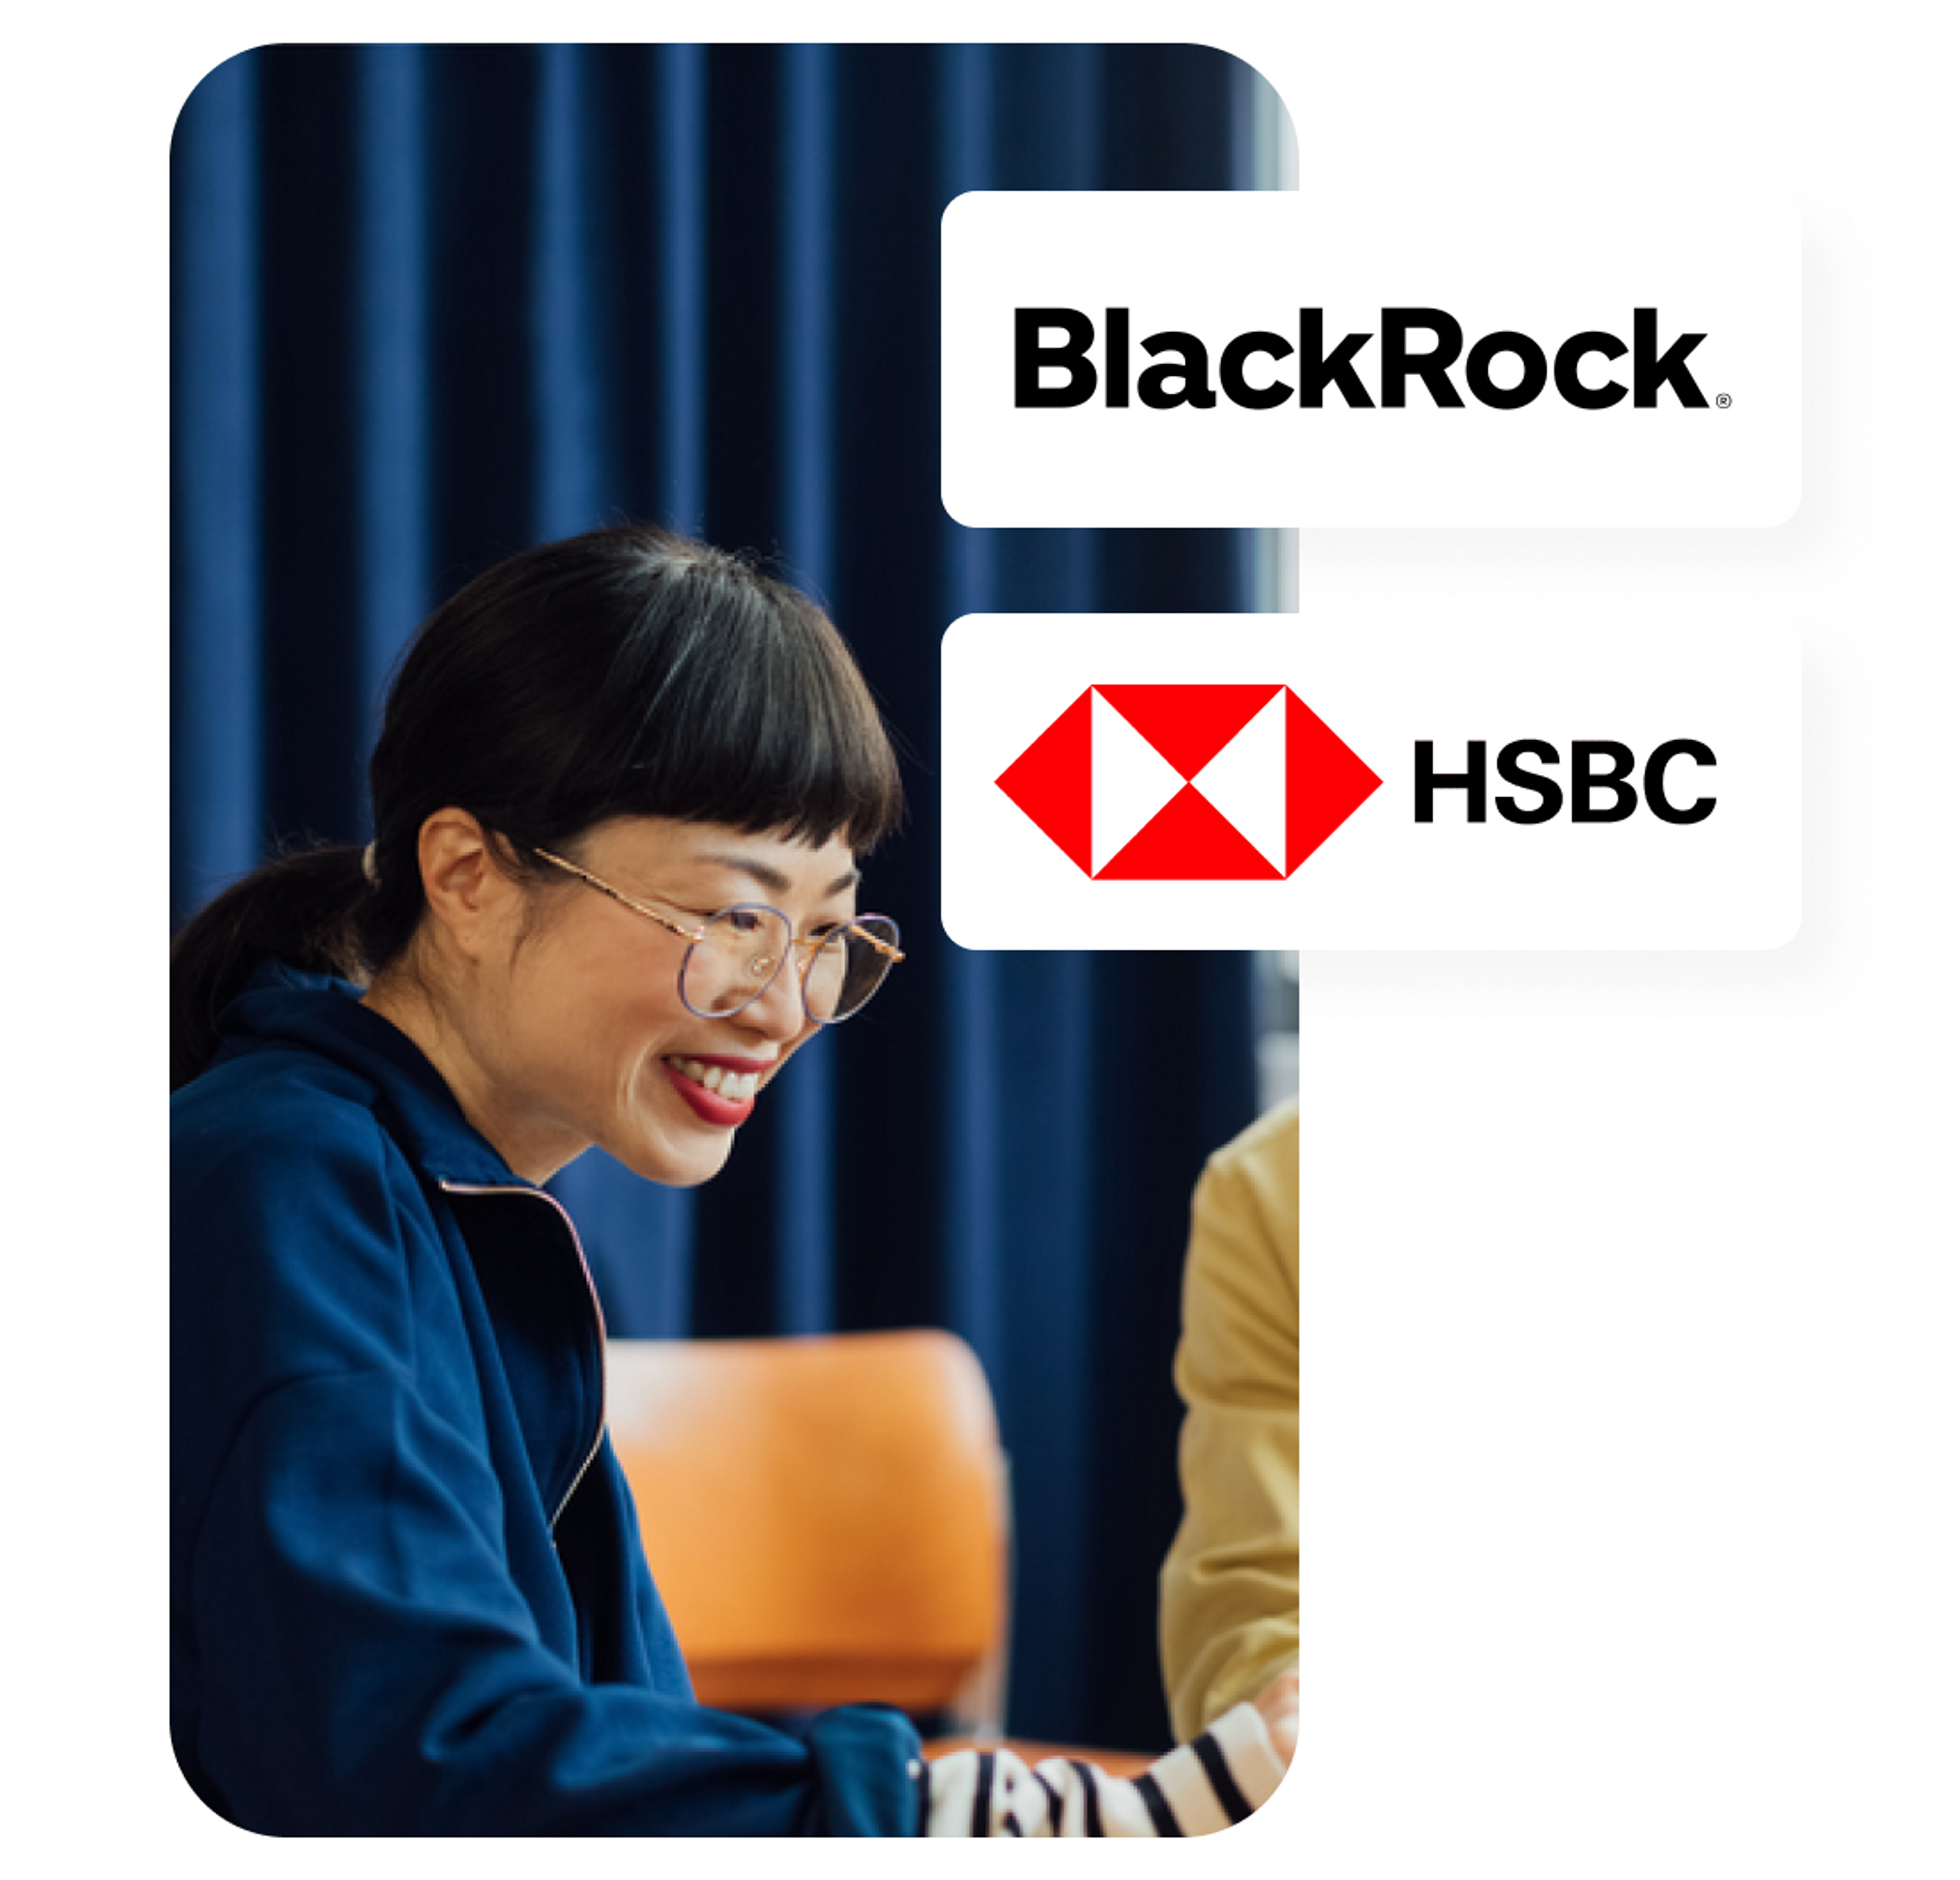 A photo of a woman smiling and the BlackRock and HSBC logos